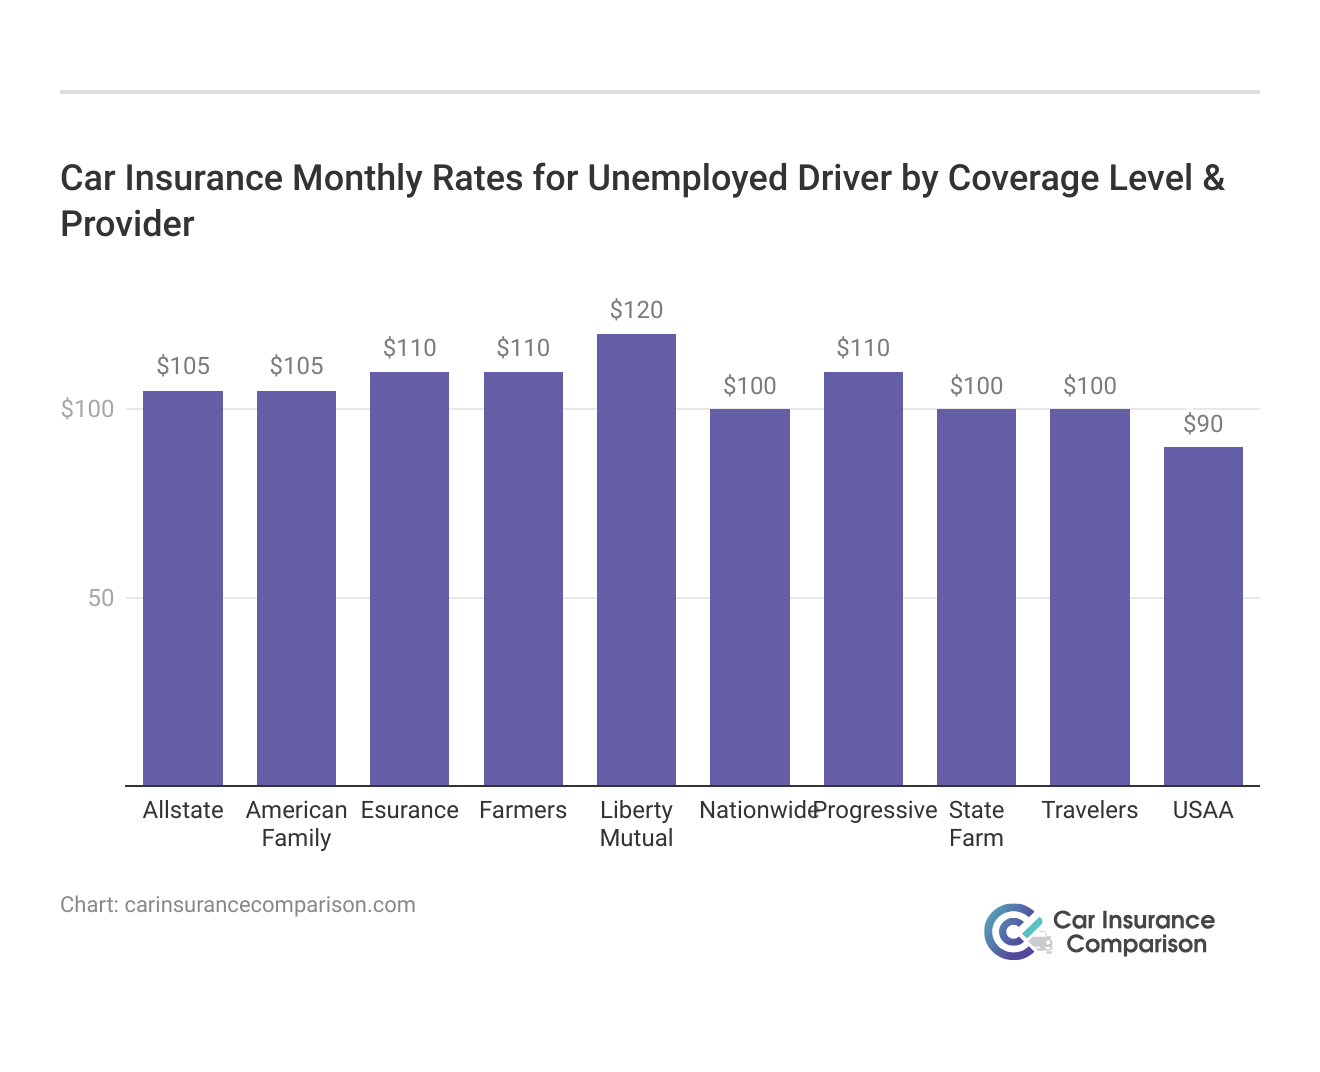 <h3>Car Insurance Monthly Rates for Unemployed Driver by Coverage Level & Provider</h3>